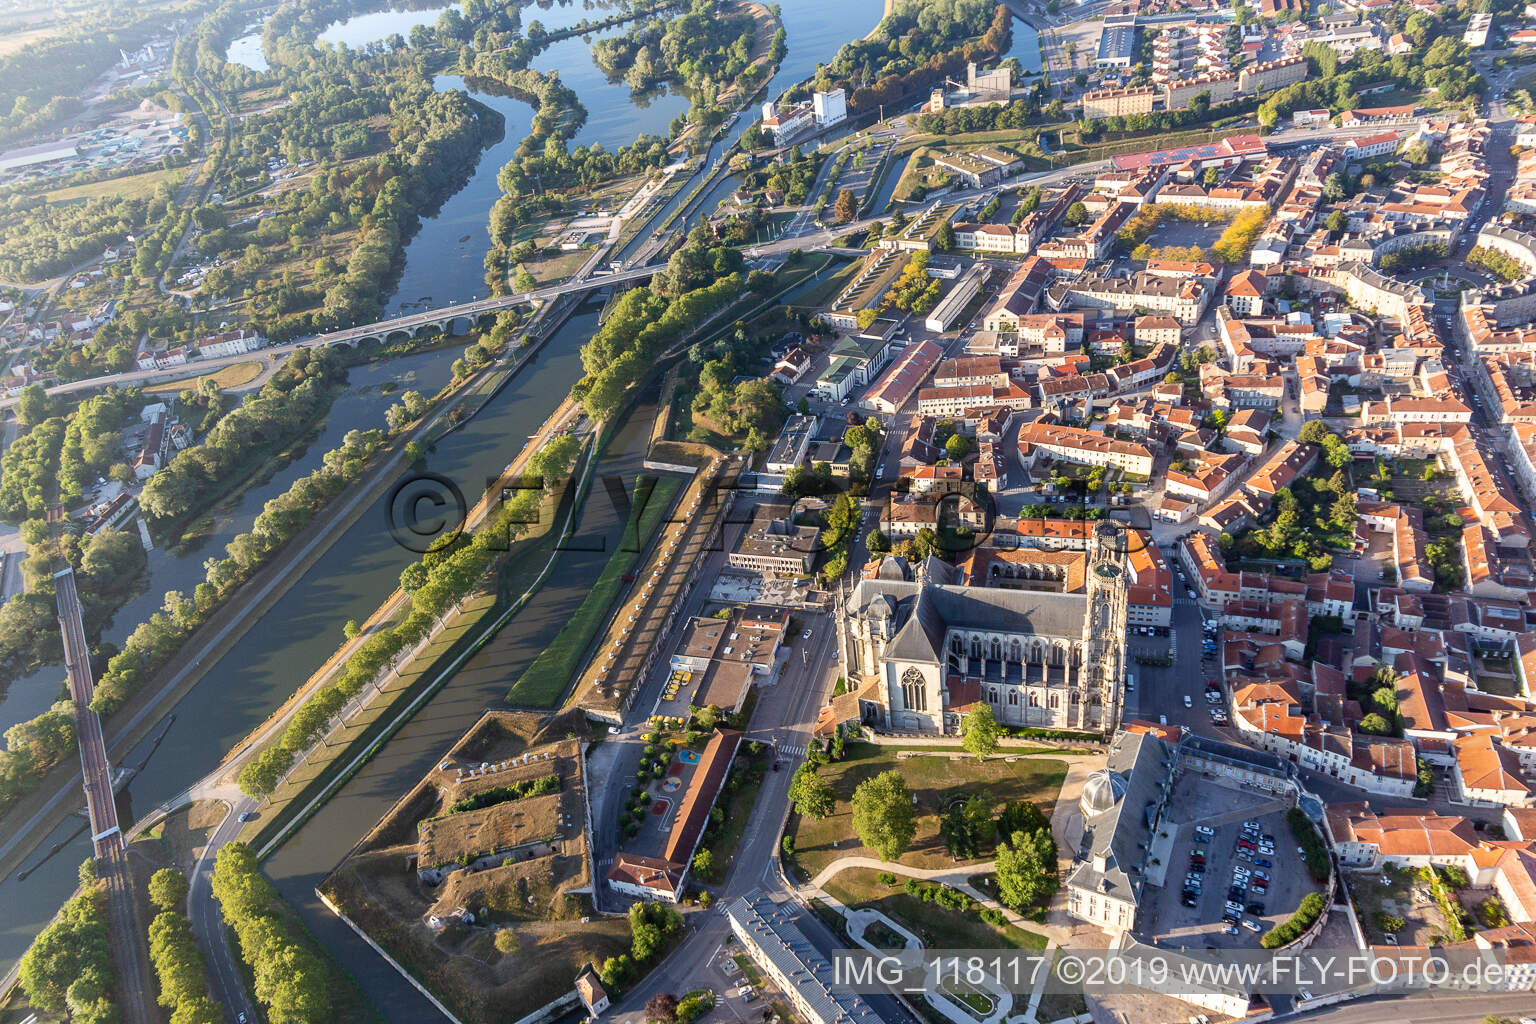 Cathedrale Saint-Etienne de Toul in Toul in the state Meurthe et Moselle, France from above